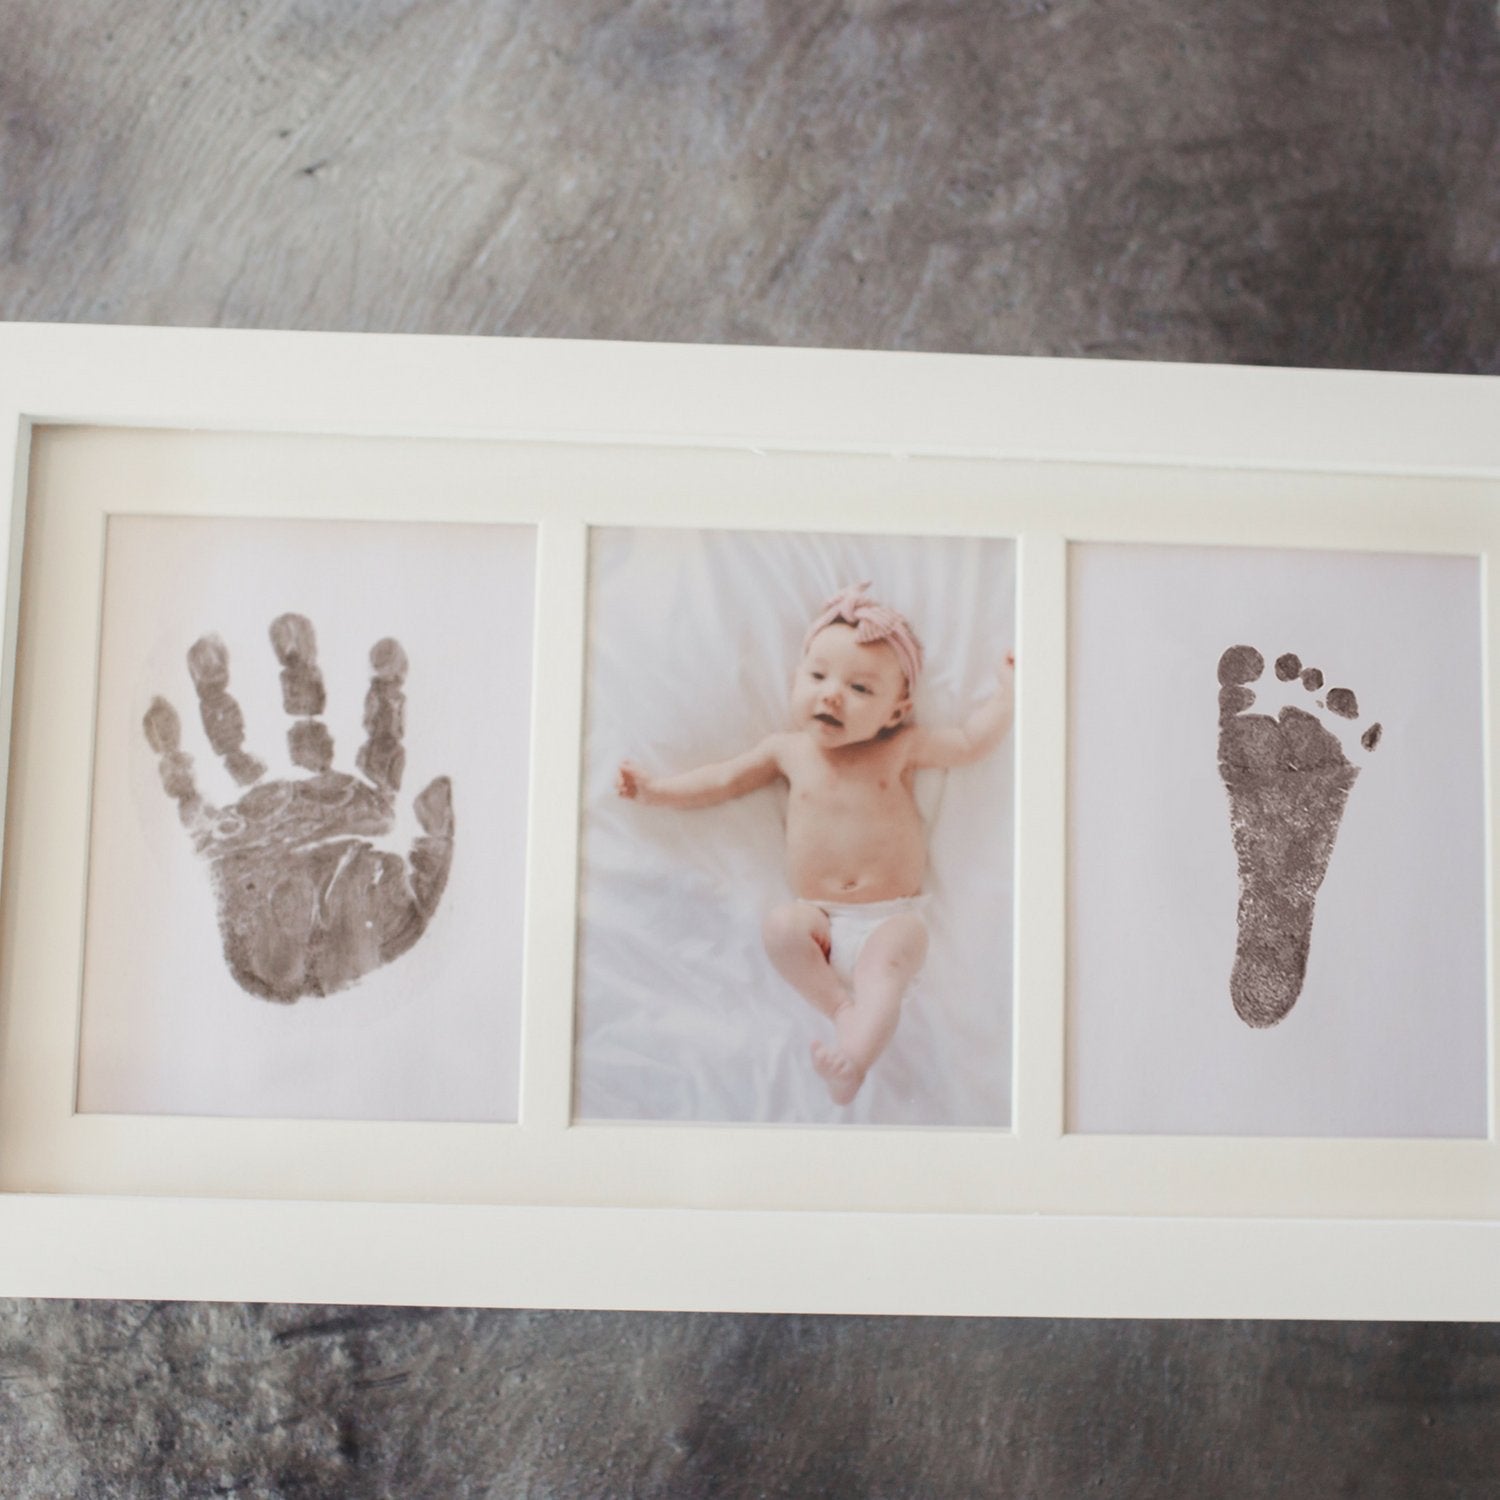 Beautiful Baby Handprint Kit & Footprint Photo Frame for Newborn Girls and Boys, Unique Baby Shower Gifts Set for Registry, Memorable Keepsake Box Decorations for Room Wall or Nursery Decor